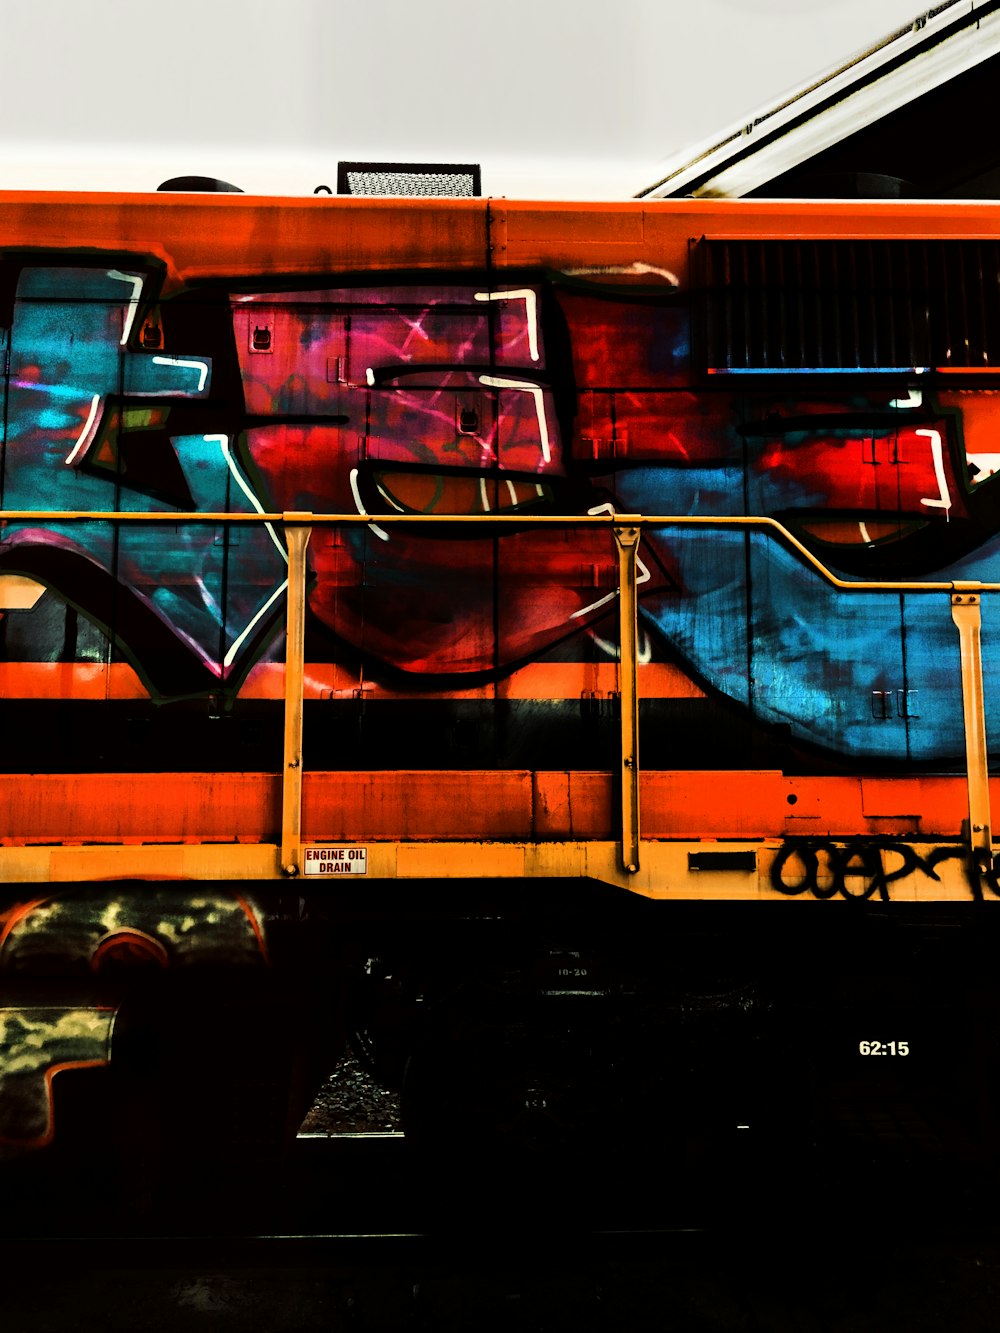 a train with graffiti on the side of it